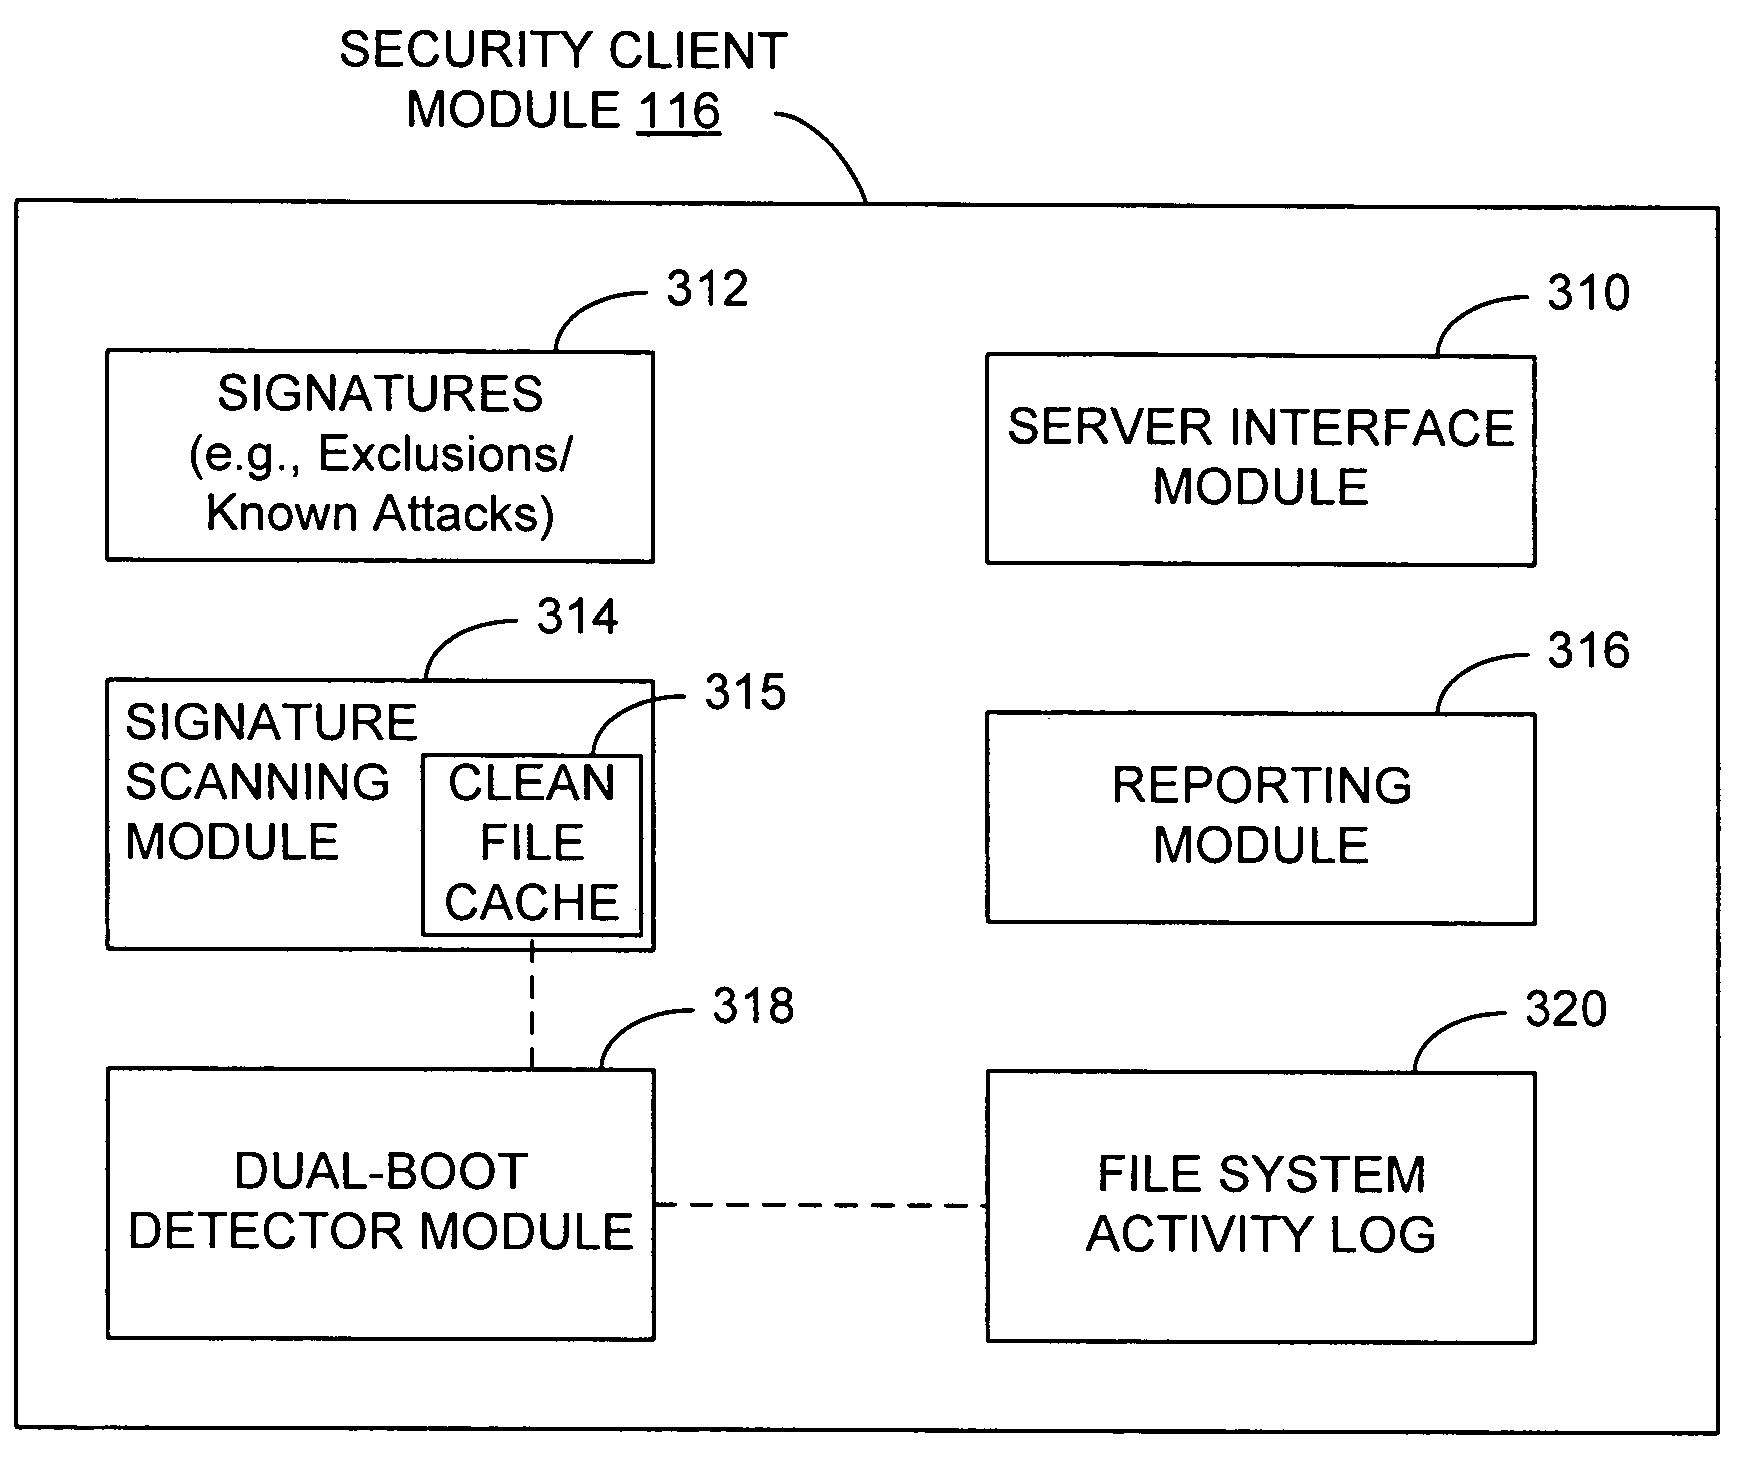 Enabling clean file cache persistence using dual-boot detection